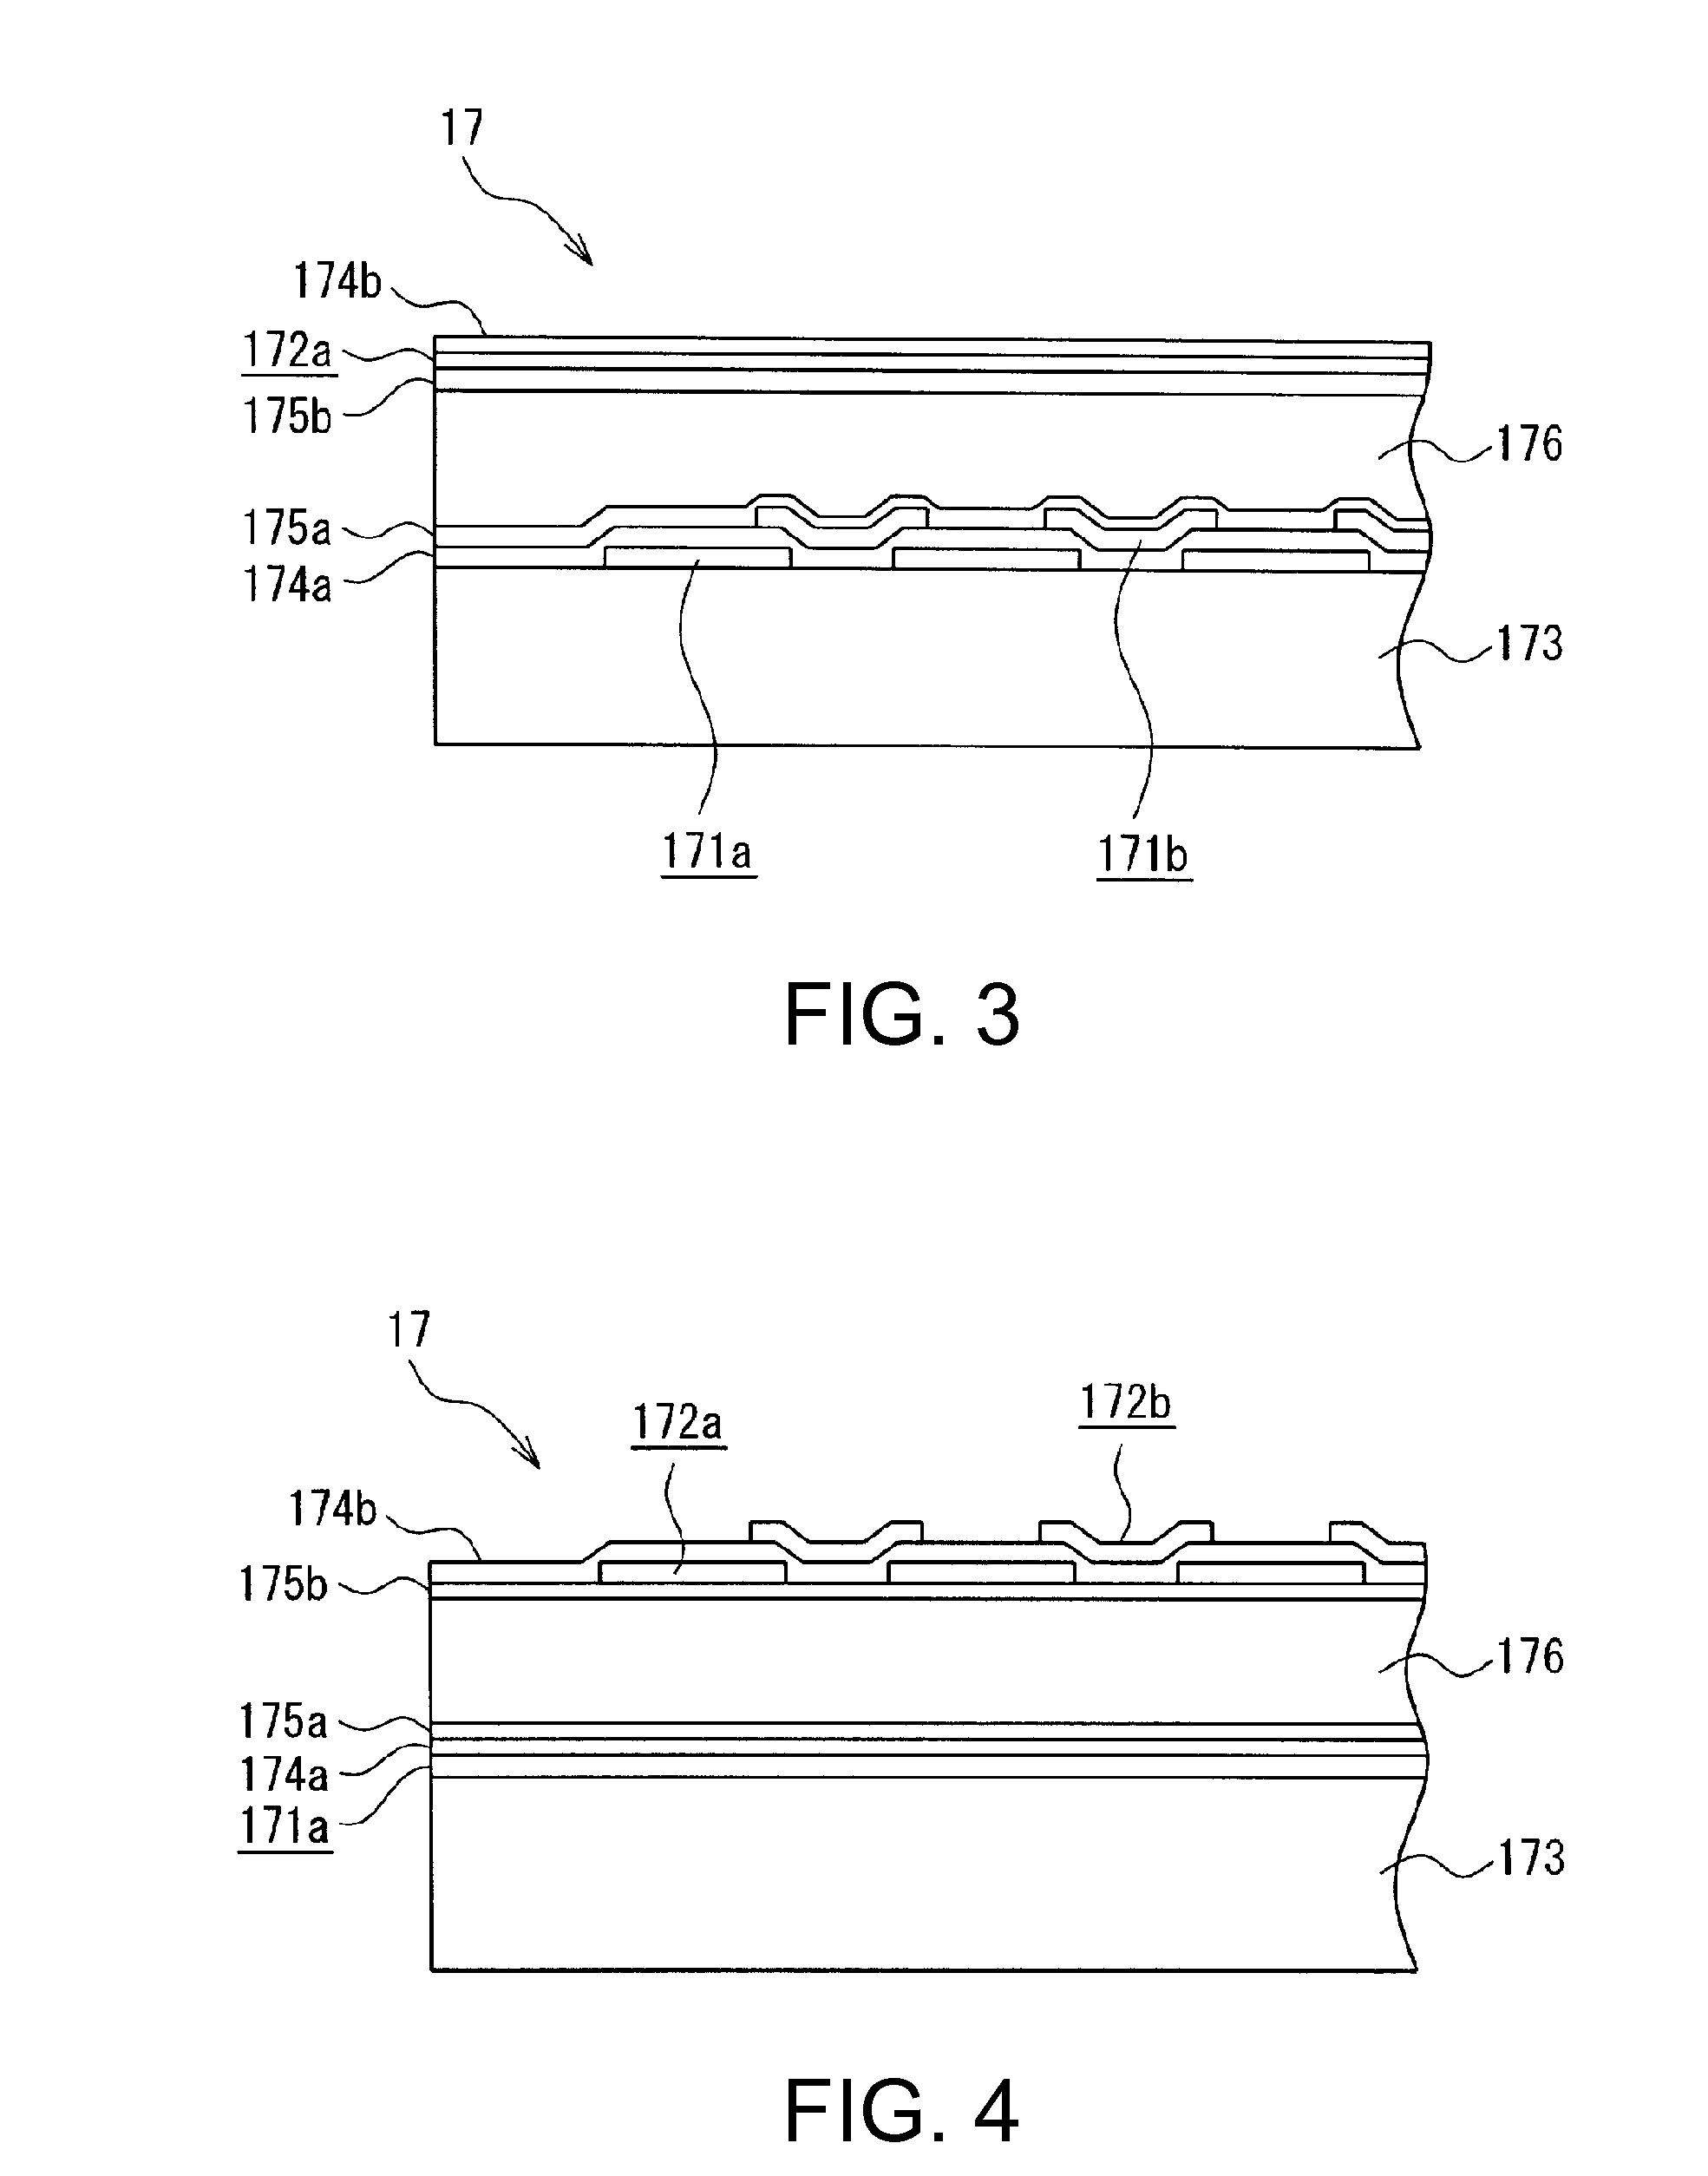 Liquid crystal blind, method of manufacturing semiconductor device using the same, and reduced projection exposure apparatus